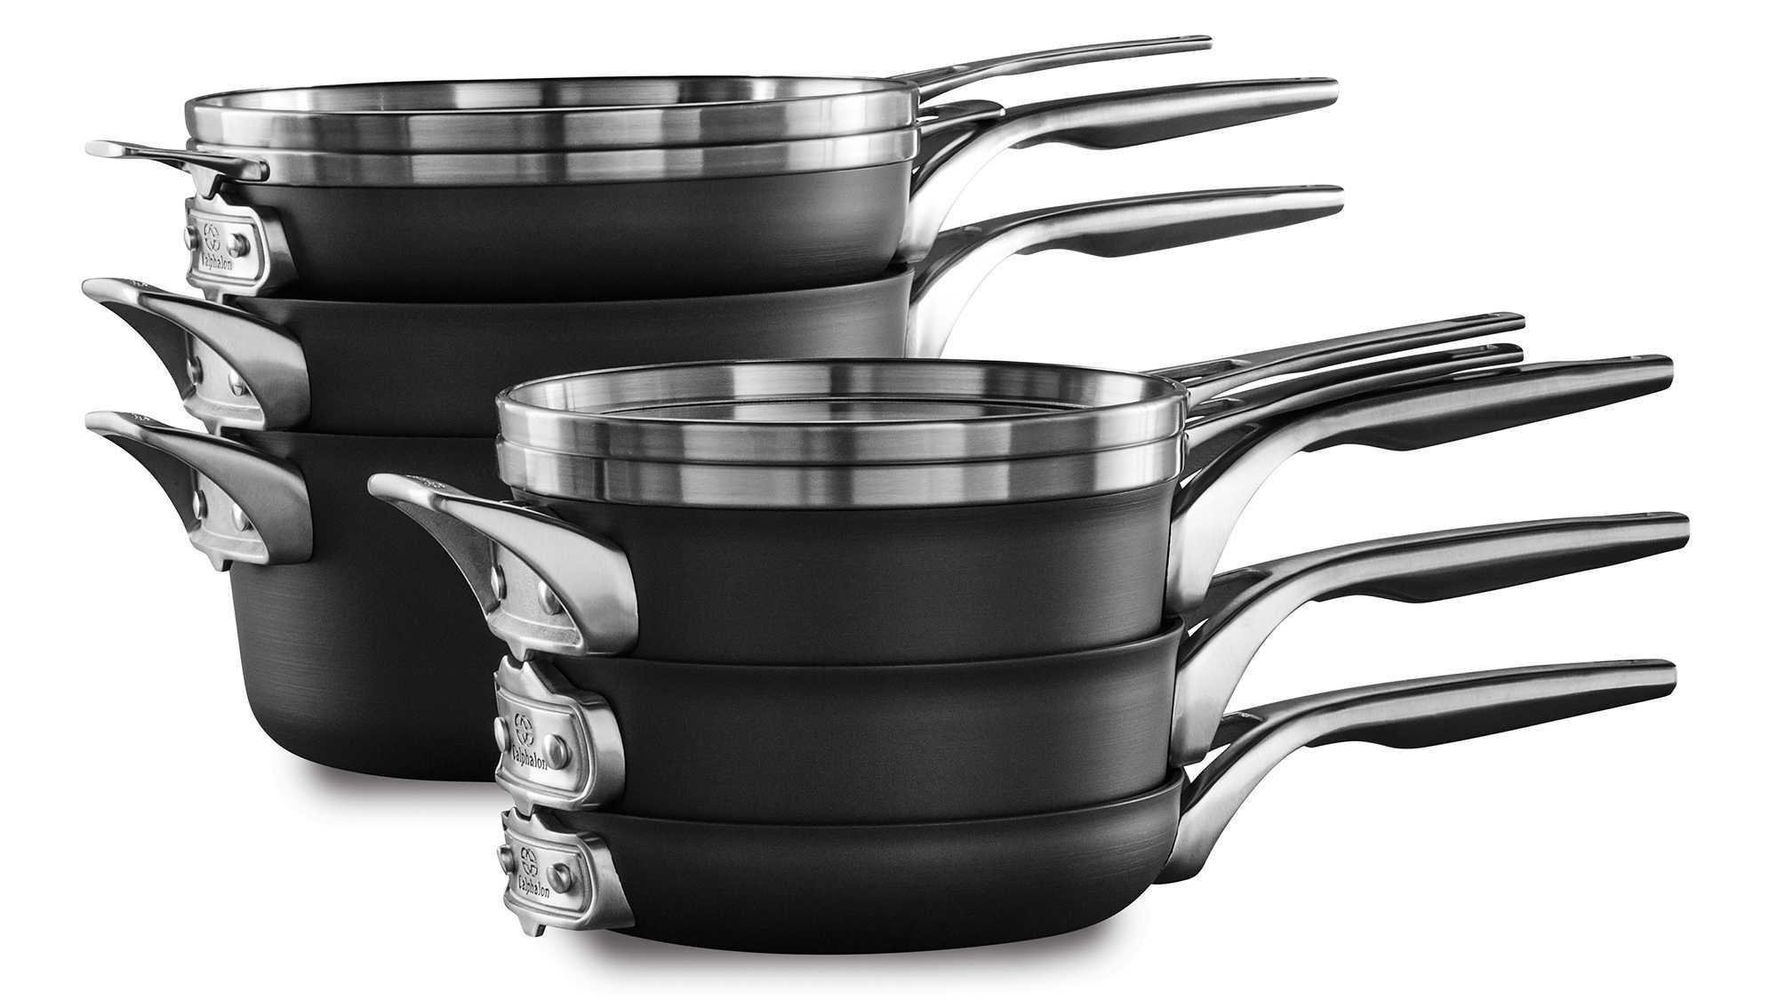 Calphalon Premier Space Saving Stainless Steel Supper Club Cookware Set 